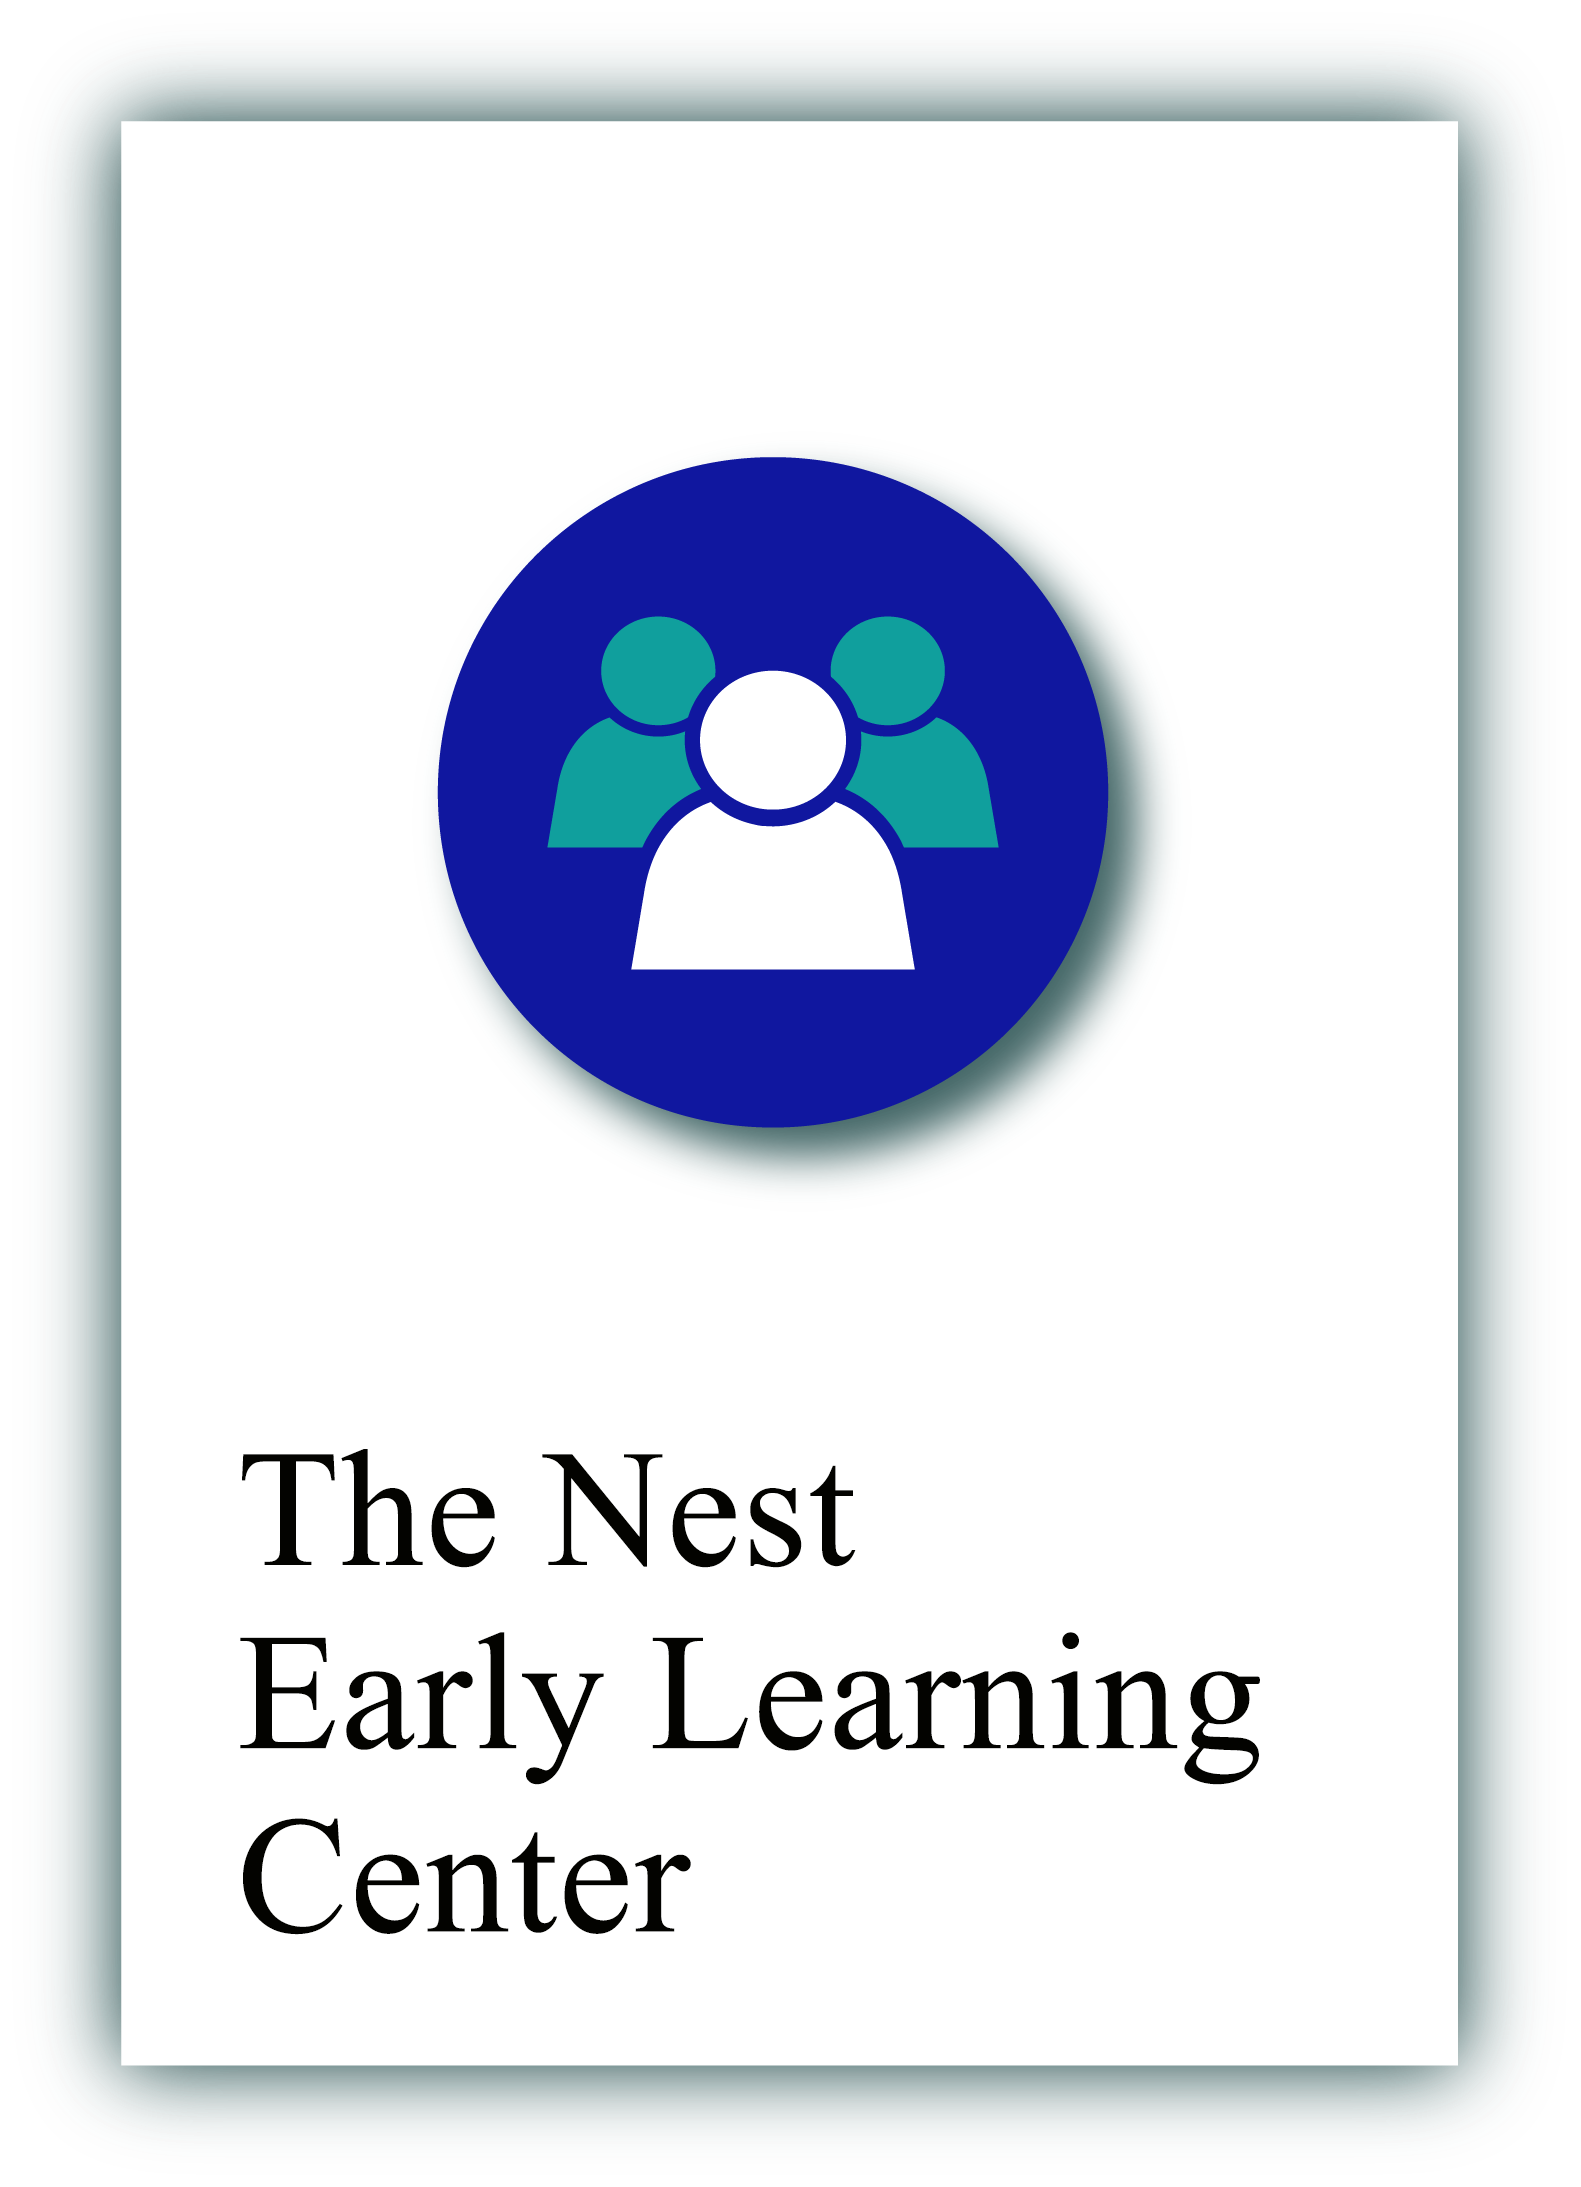 The Nest Early Learning Center